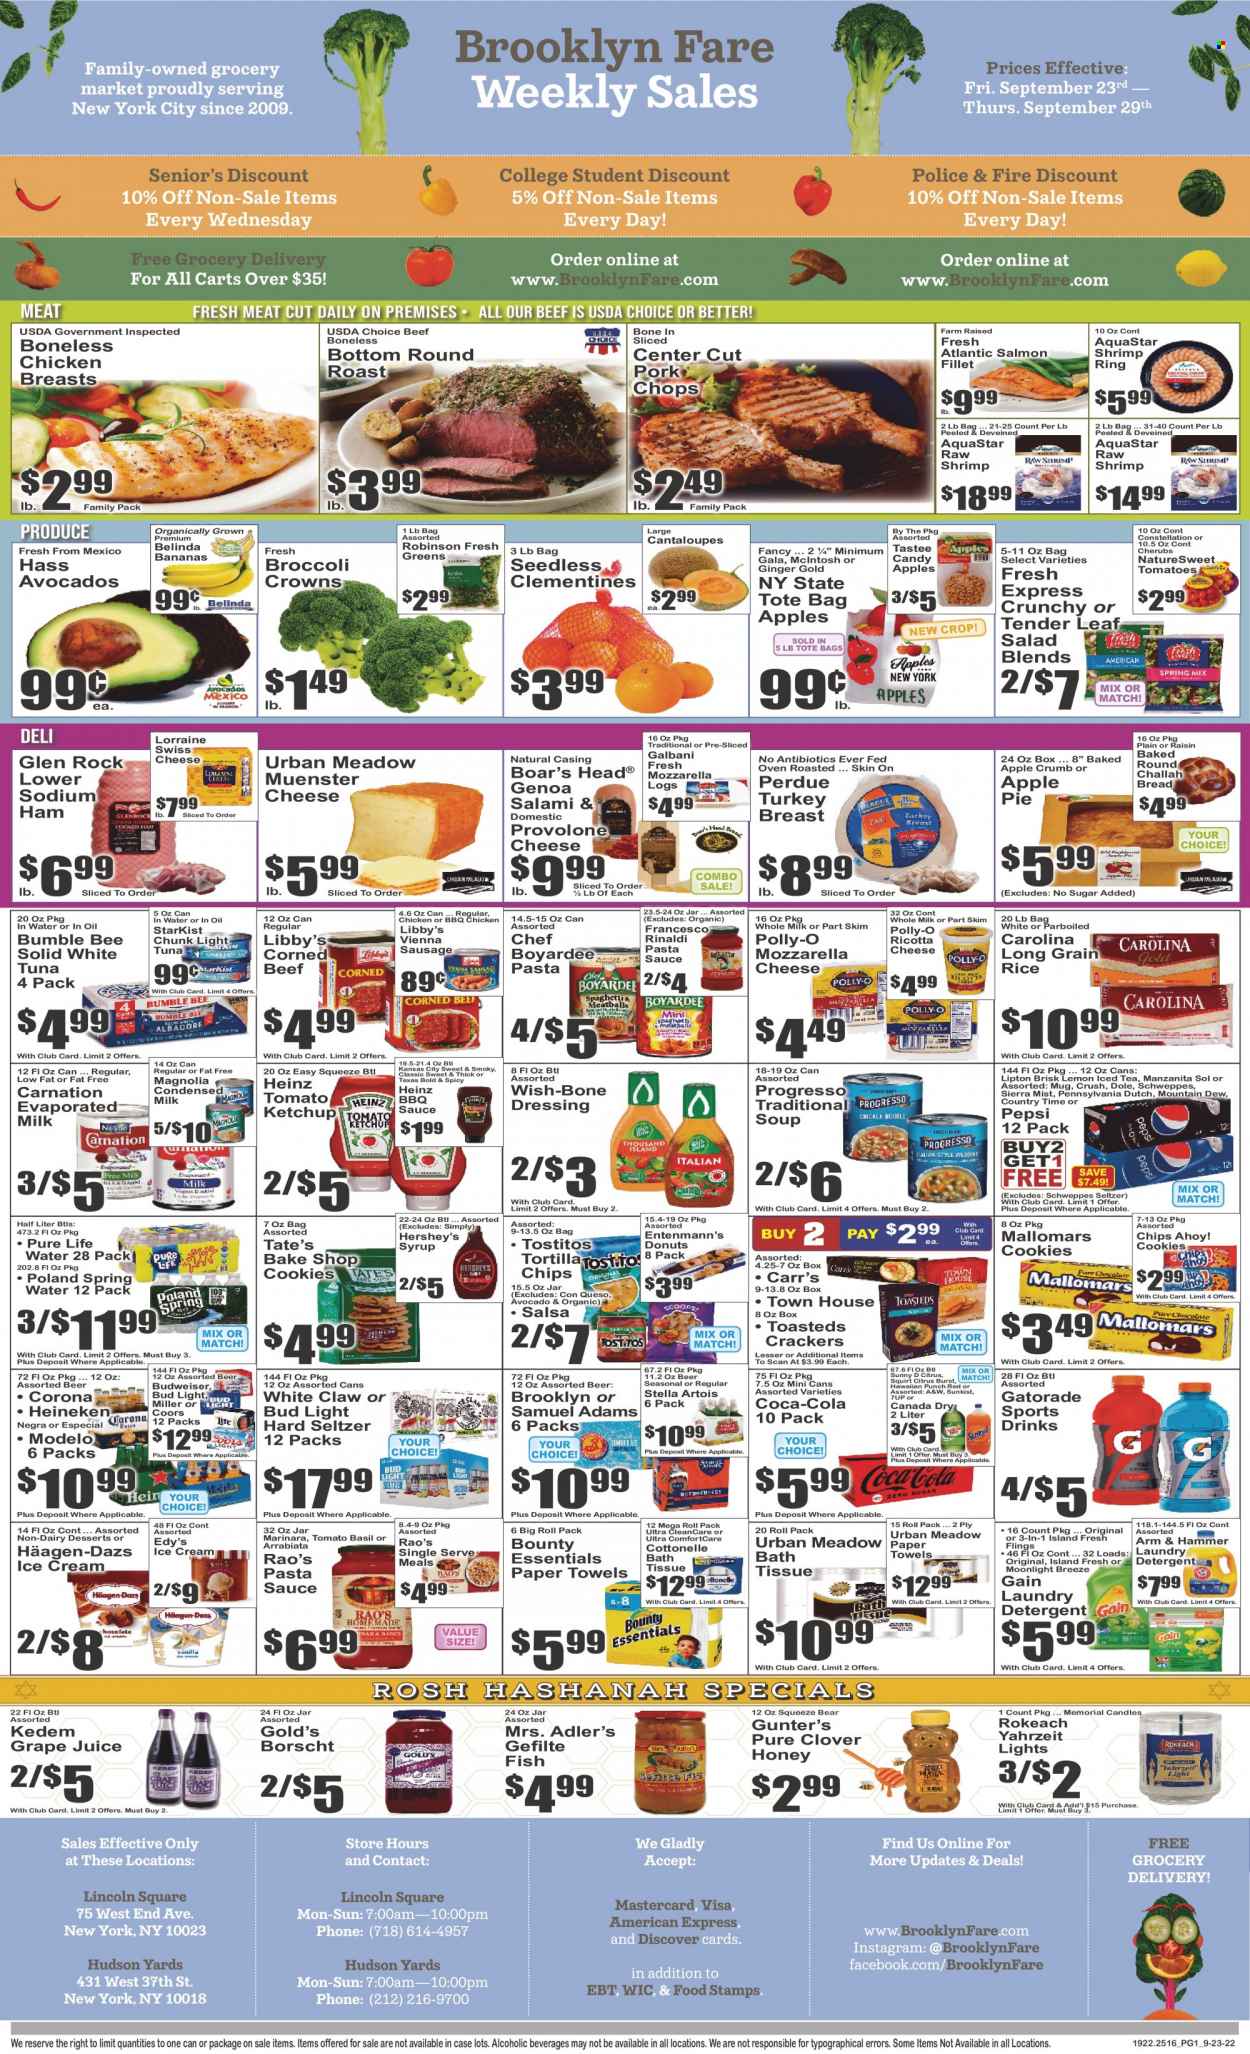 thumbnail - Brooklyn Fare Flyer - 09/23/2022 - 09/29/2022 - Sales products - bread, pie, apple pie, challah, donut, Entenmann's, cantaloupe, ginger, salad, Dole, avocado, Gala, salmon, salmon fillet, tuna, fish, shrimps, StarKist, pasta sauce, soup, Bumble Bee, sauce, Progresso, Perdue®, salami, ham, sausage, vienna sausage, corned beef, mozzarella, ricotta, swiss cheese, Münster cheese, Galbani, Provolone, evaporated milk, condensed milk, ice cream, Hershey's, Häagen-Dazs, cookies, Bounty, crackers, Chips Ahoy!, tortilla chips, chips, Tostitos, ARM & HAMMER, Heinz, light tuna, Chef Boyardee, rice, long grain rice, BBQ sauce, ketchup, dressing, salsa, honey, syrup, Canada Dry, Coca-Cola, Mountain Dew, Schweppes, Pepsi, juice, Lipton, ice tea, 7UP, A&W, Kedem, Sierra Mist, Country Time, Gatorade, spring water, Pure Life Water, White Claw, Hard Seltzer, beer, Bud Light, Corona Extra, Heineken, Miller, Modelo, turkey breast, chicken breasts, beef meat, round roast, pork chops, pork meat, bath tissue, Cottonelle, kitchen towels, paper towels, detergent, Gain, laundry detergent, mug, candle, tote, tote bag, Budweiser, clementines, Stella Artois, Coors. Page 1.